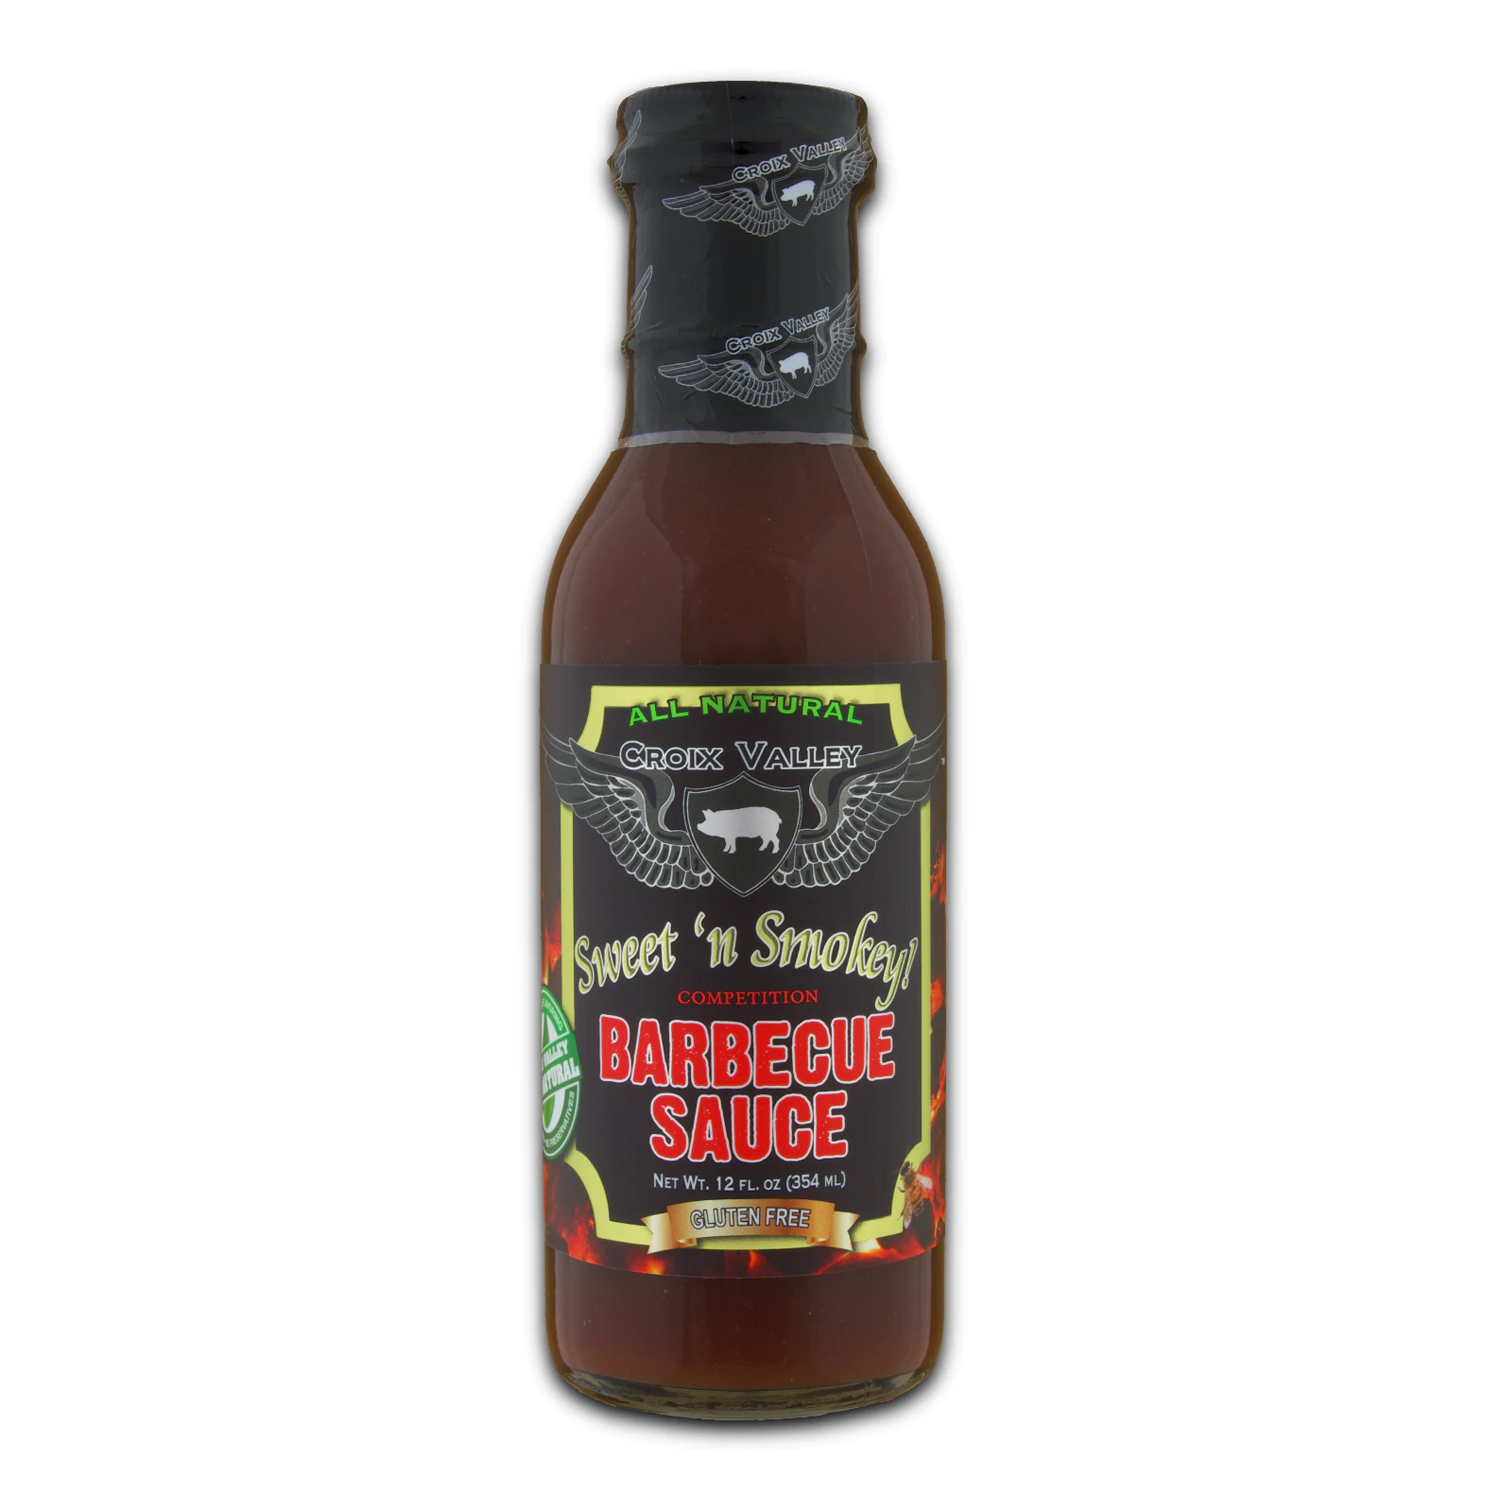 Sweet 'n Smokey Competition Barbecue Sauce